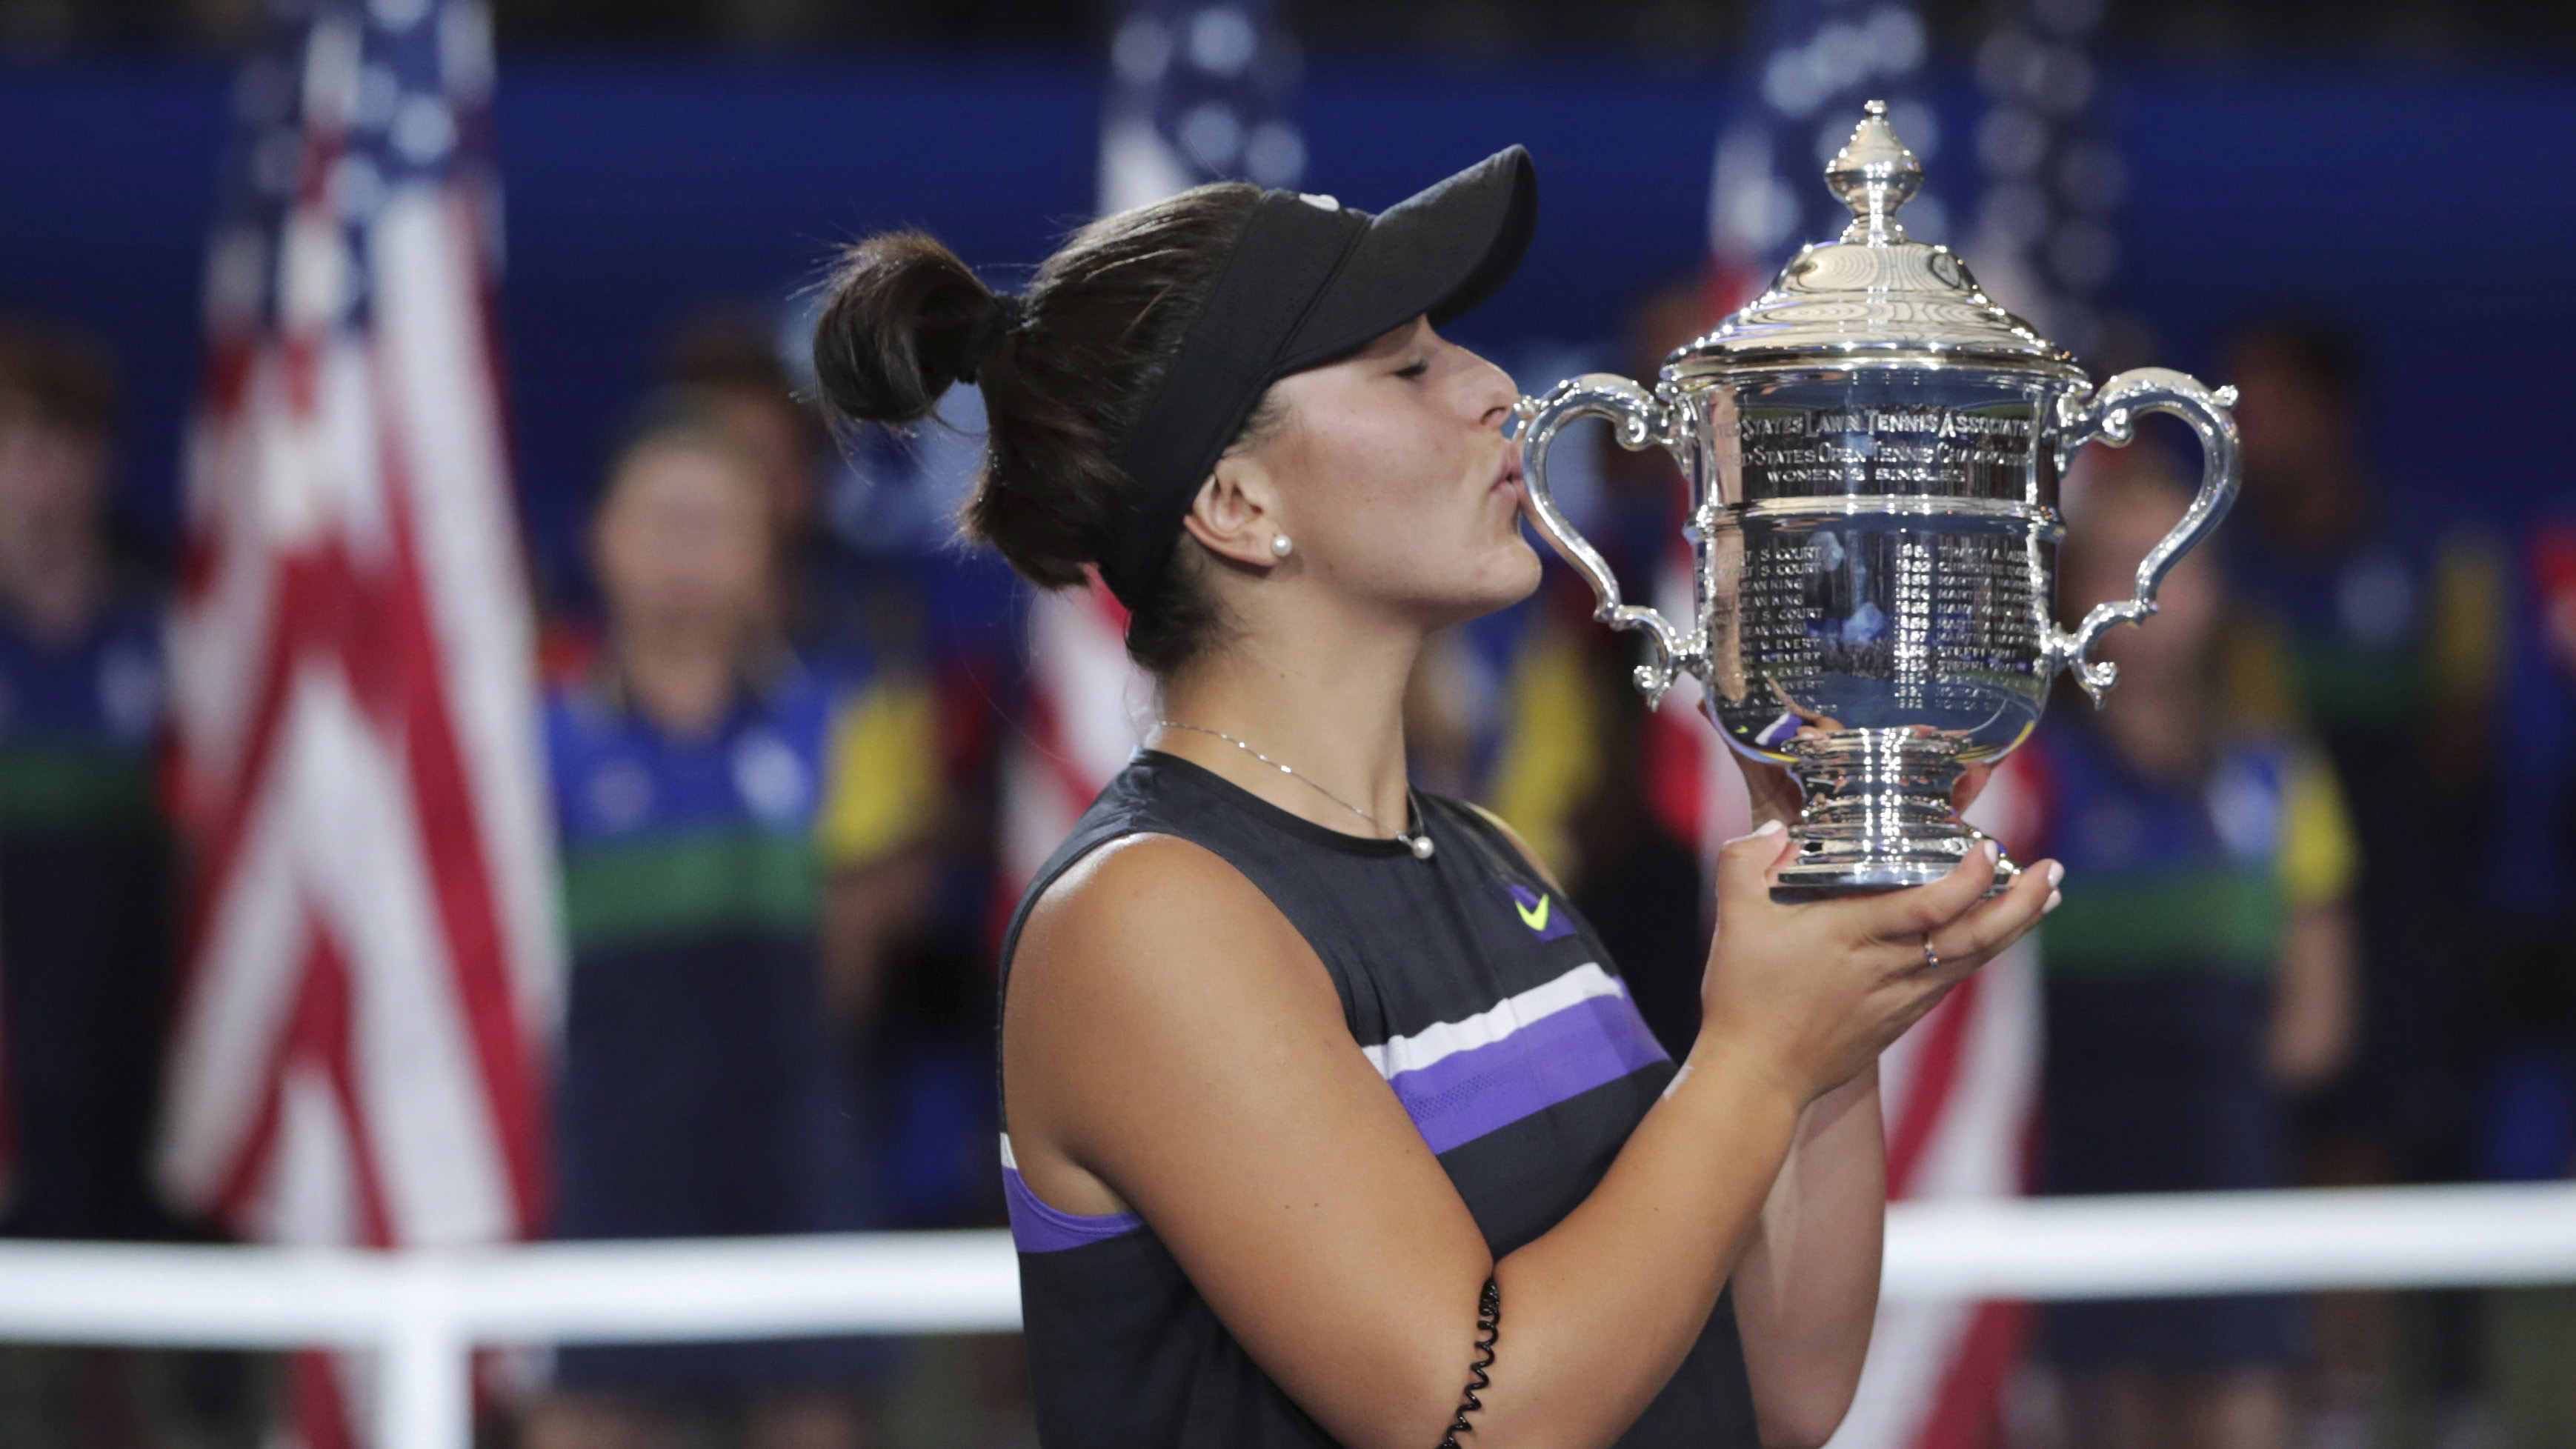 Bianca Andreescu Wins the US Open !!!